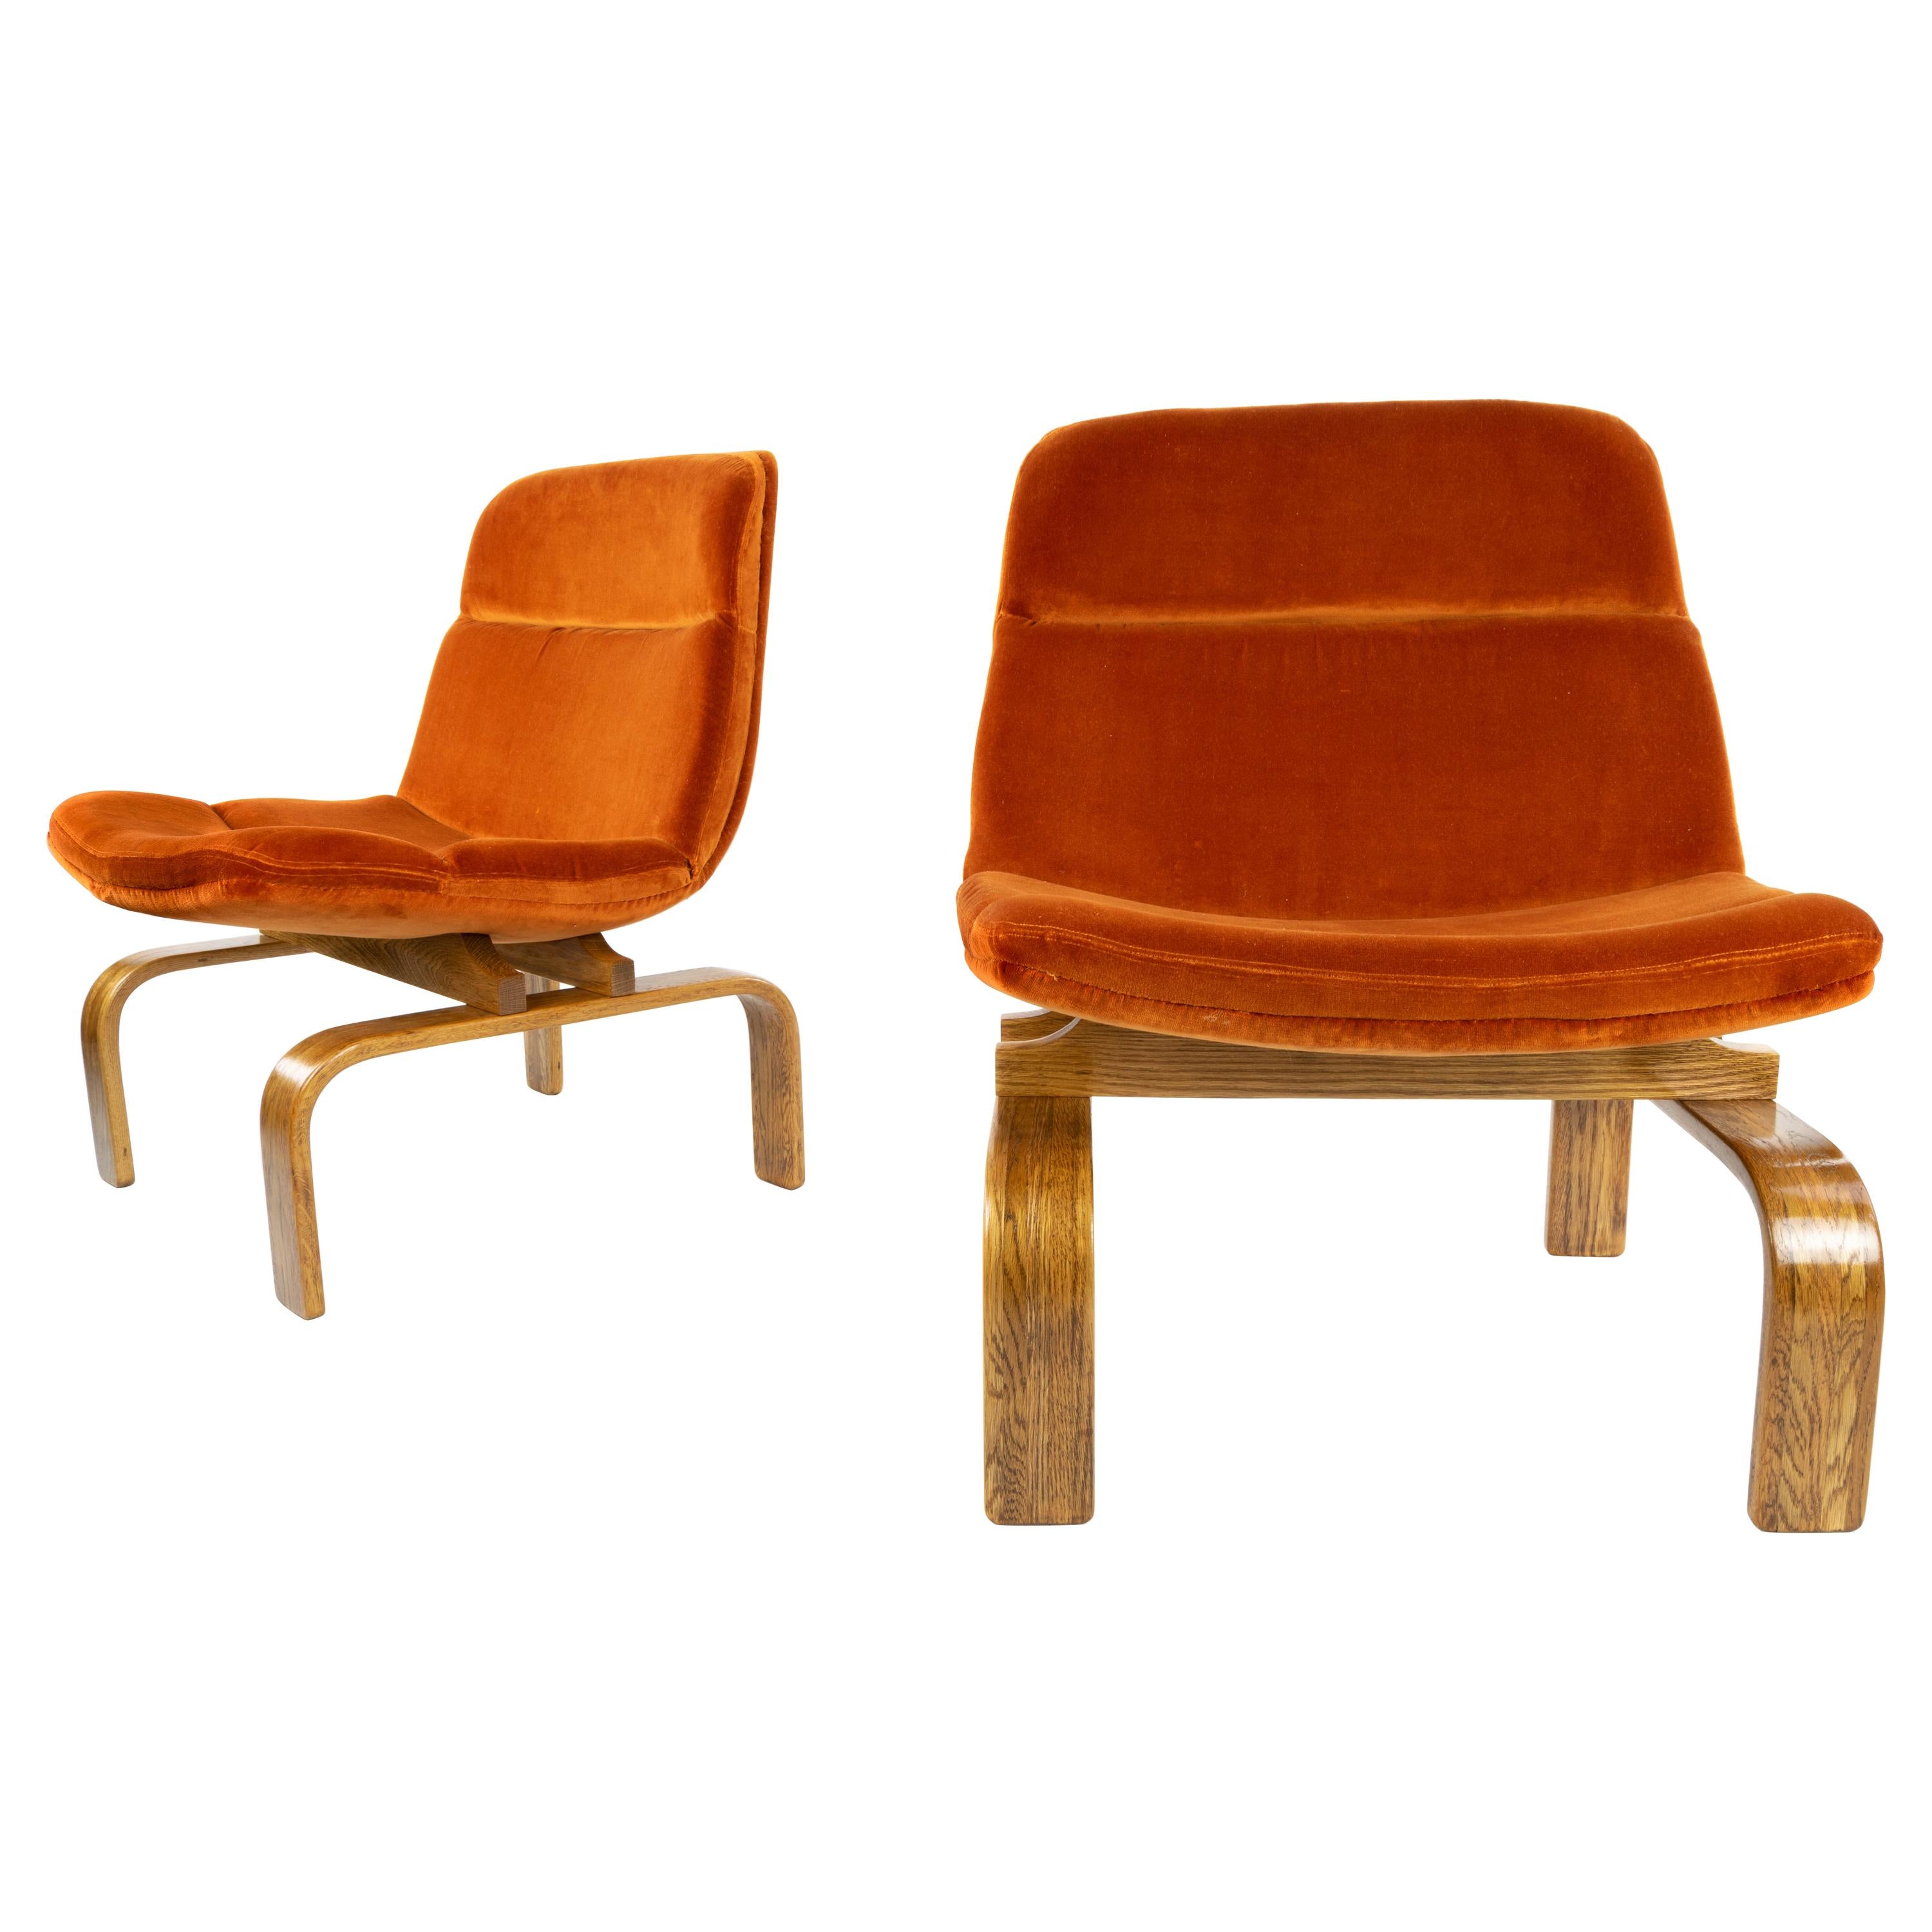 Two Midcentury Orange Velvet and Oak Lounge Chairs by AG Barcelona, 1960